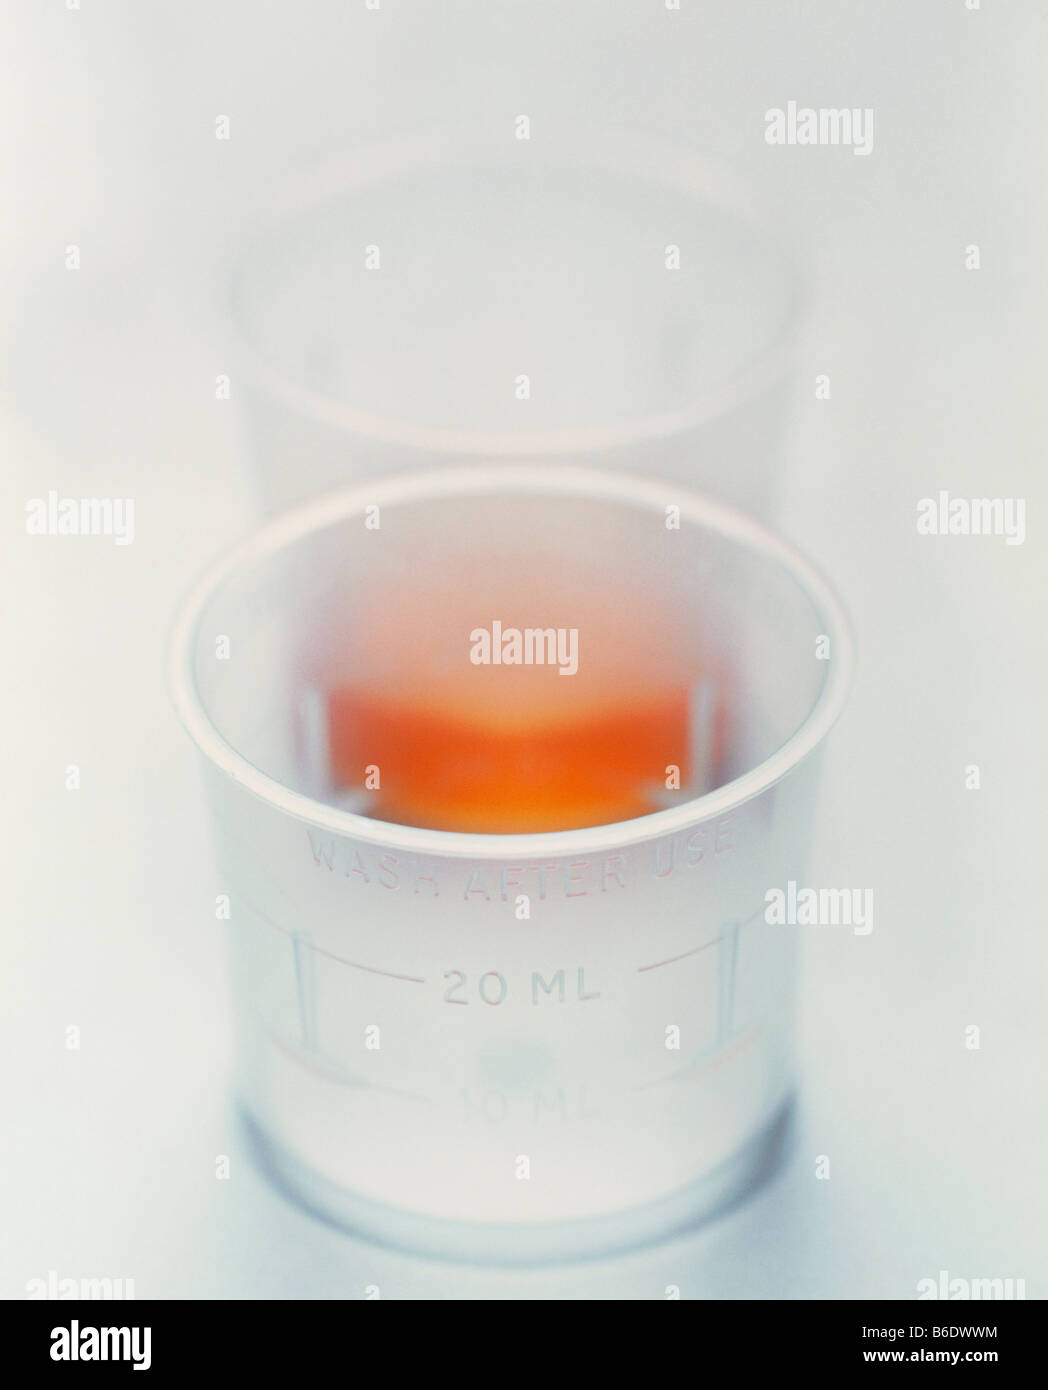 Cup of medicine. Two plastic cups, one containing a liquid medicine. The cups are marked to measure the dose. Stock Photo